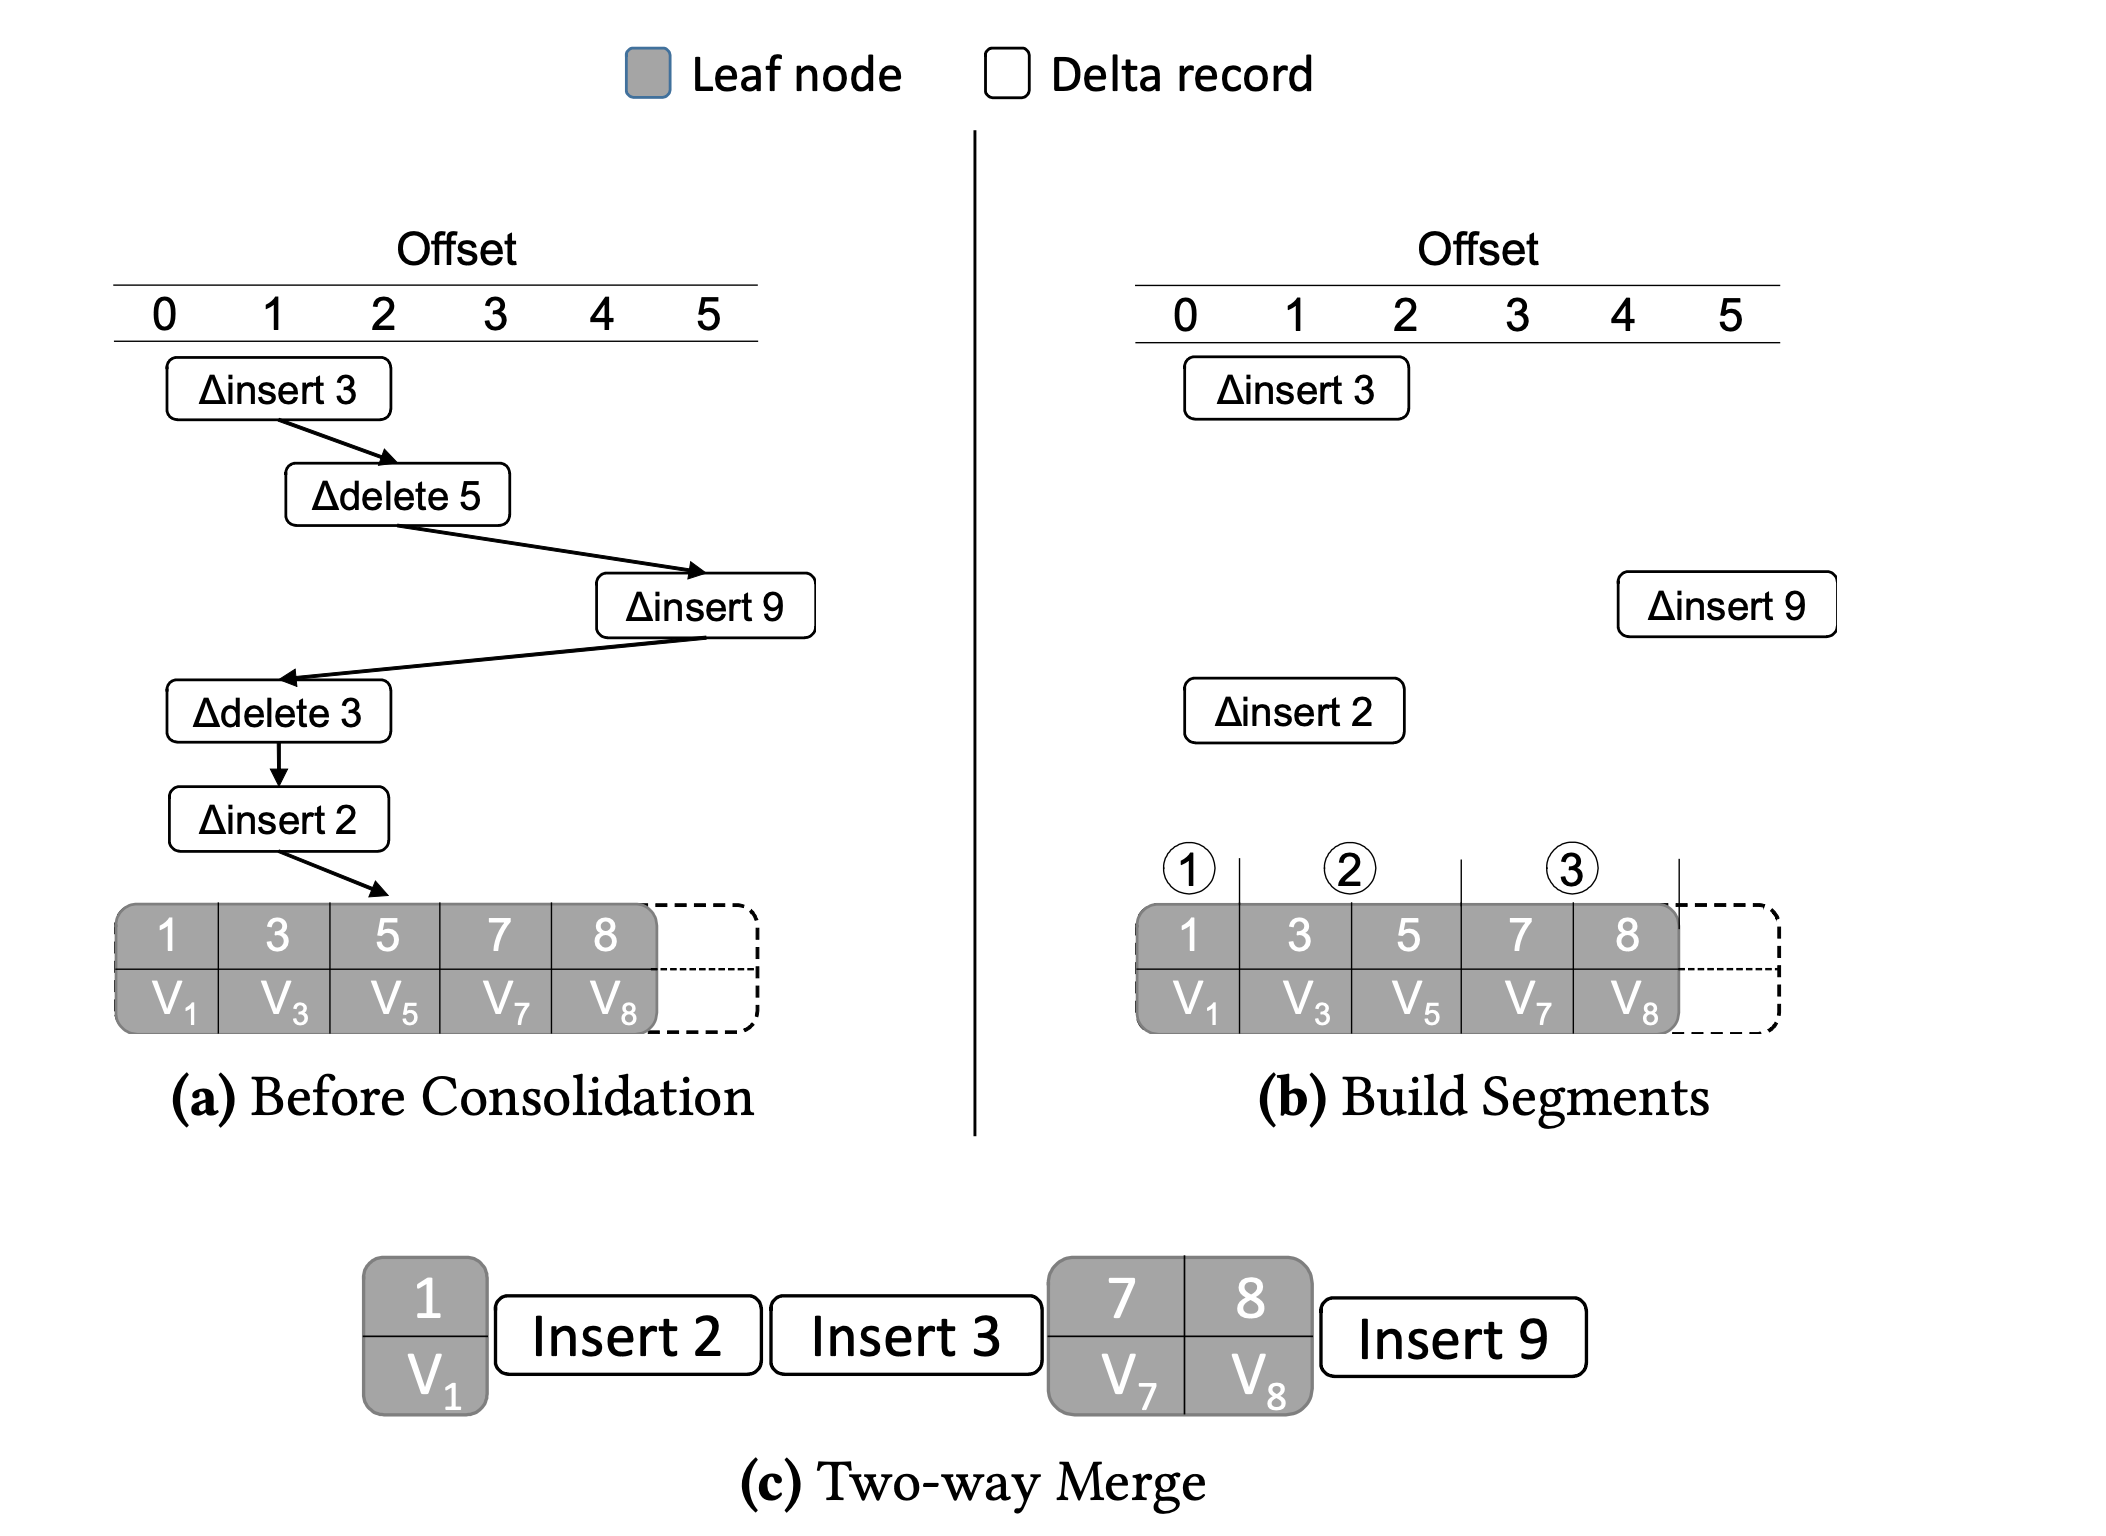 **Fast Consolidation** – This diagram depicts the fast consolidation
algorithm. The base node is first divided into segments using the offset
attribute in the delta records. Then a two-way merge applies all valid insert
deltas onto the new base node after copying live elements from the old base node.